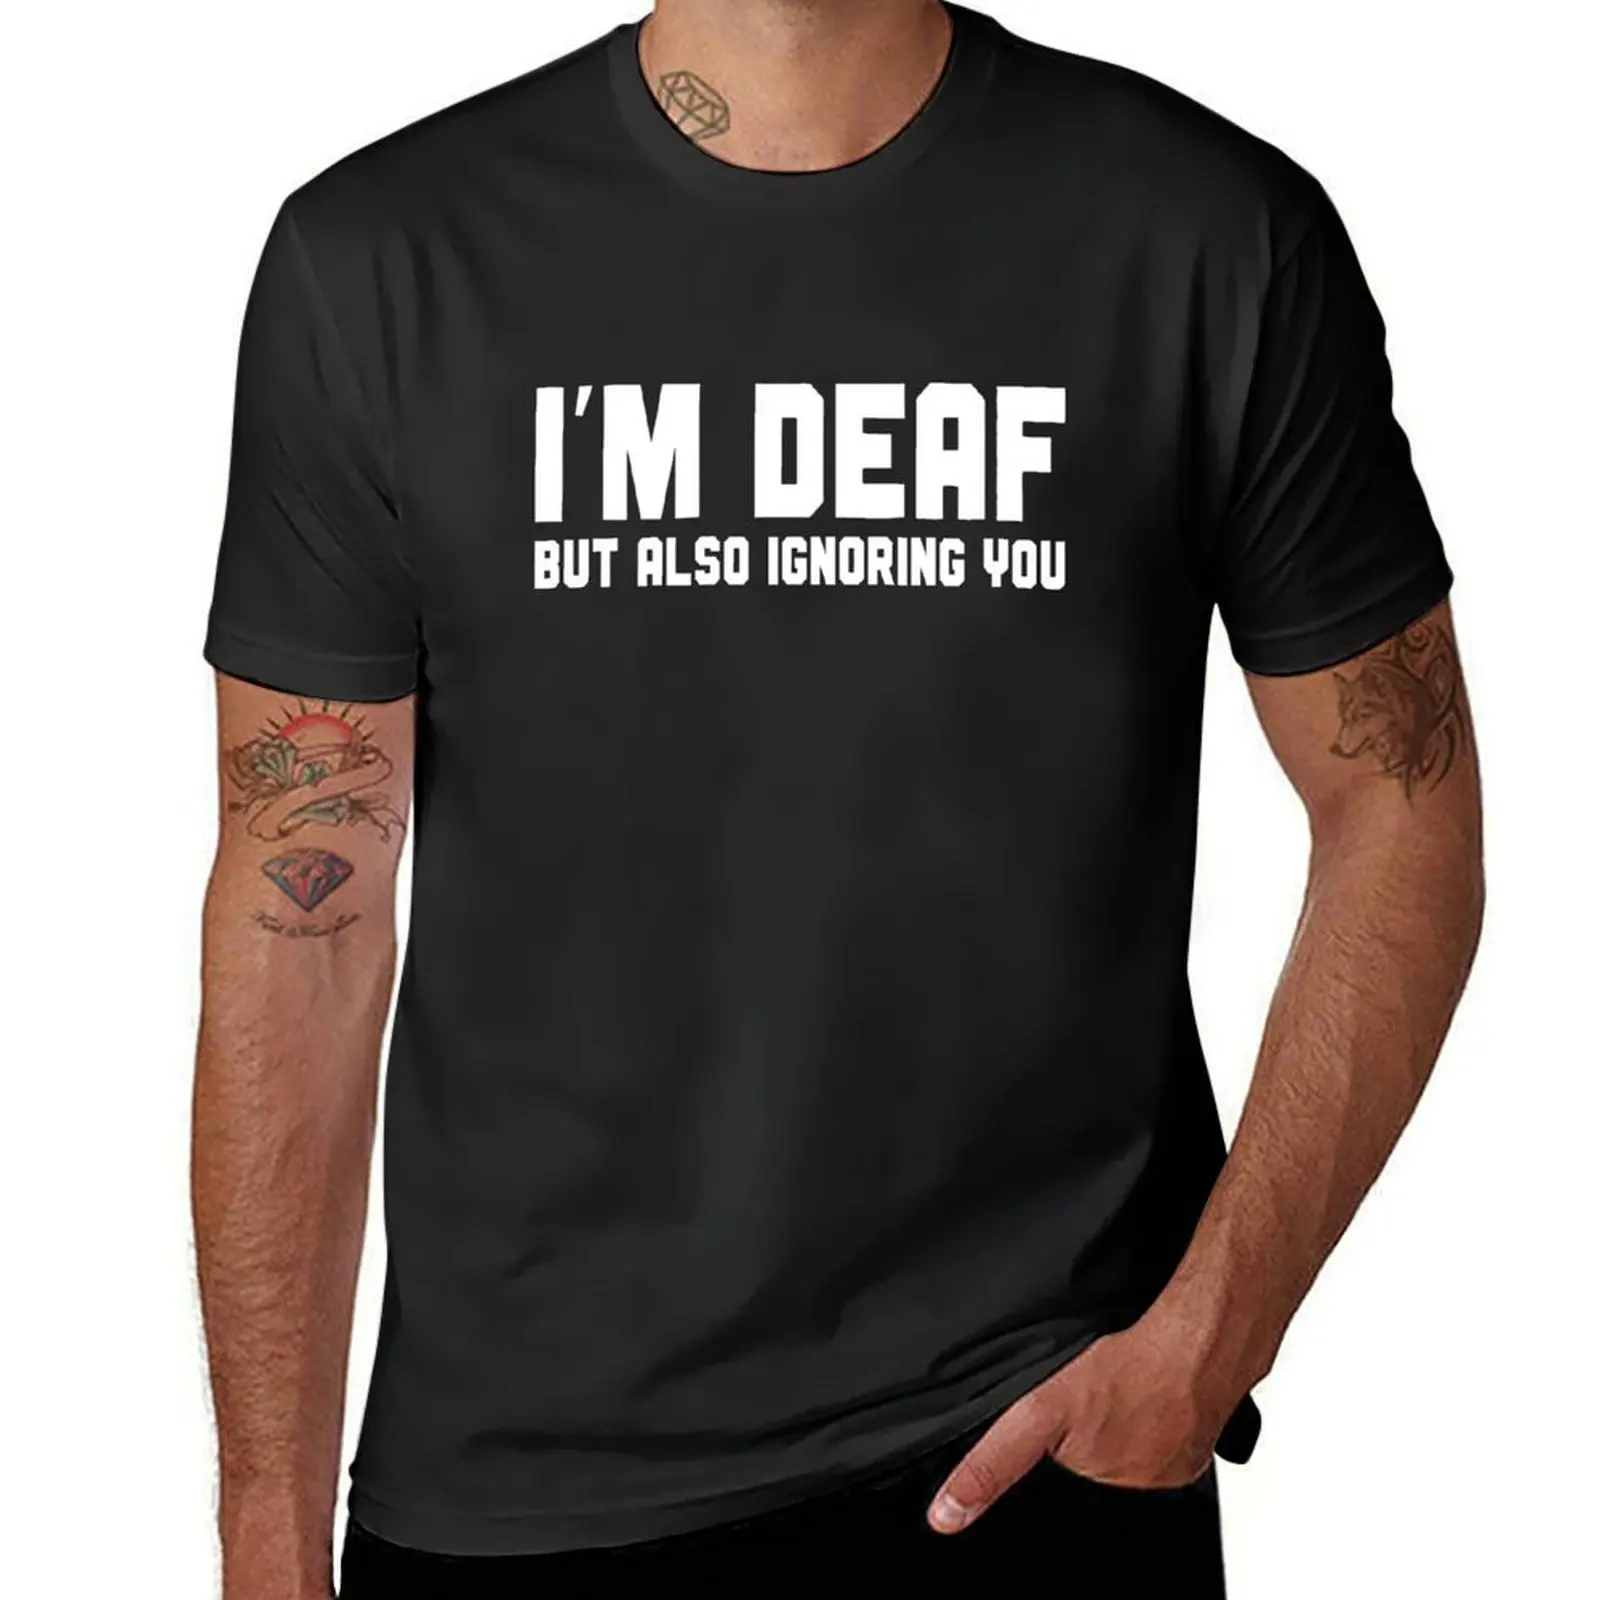 

I'm Deaf But Also Ignoring You T-Shirt for a boy plus size tops plus sizes mens big and tall t shirts